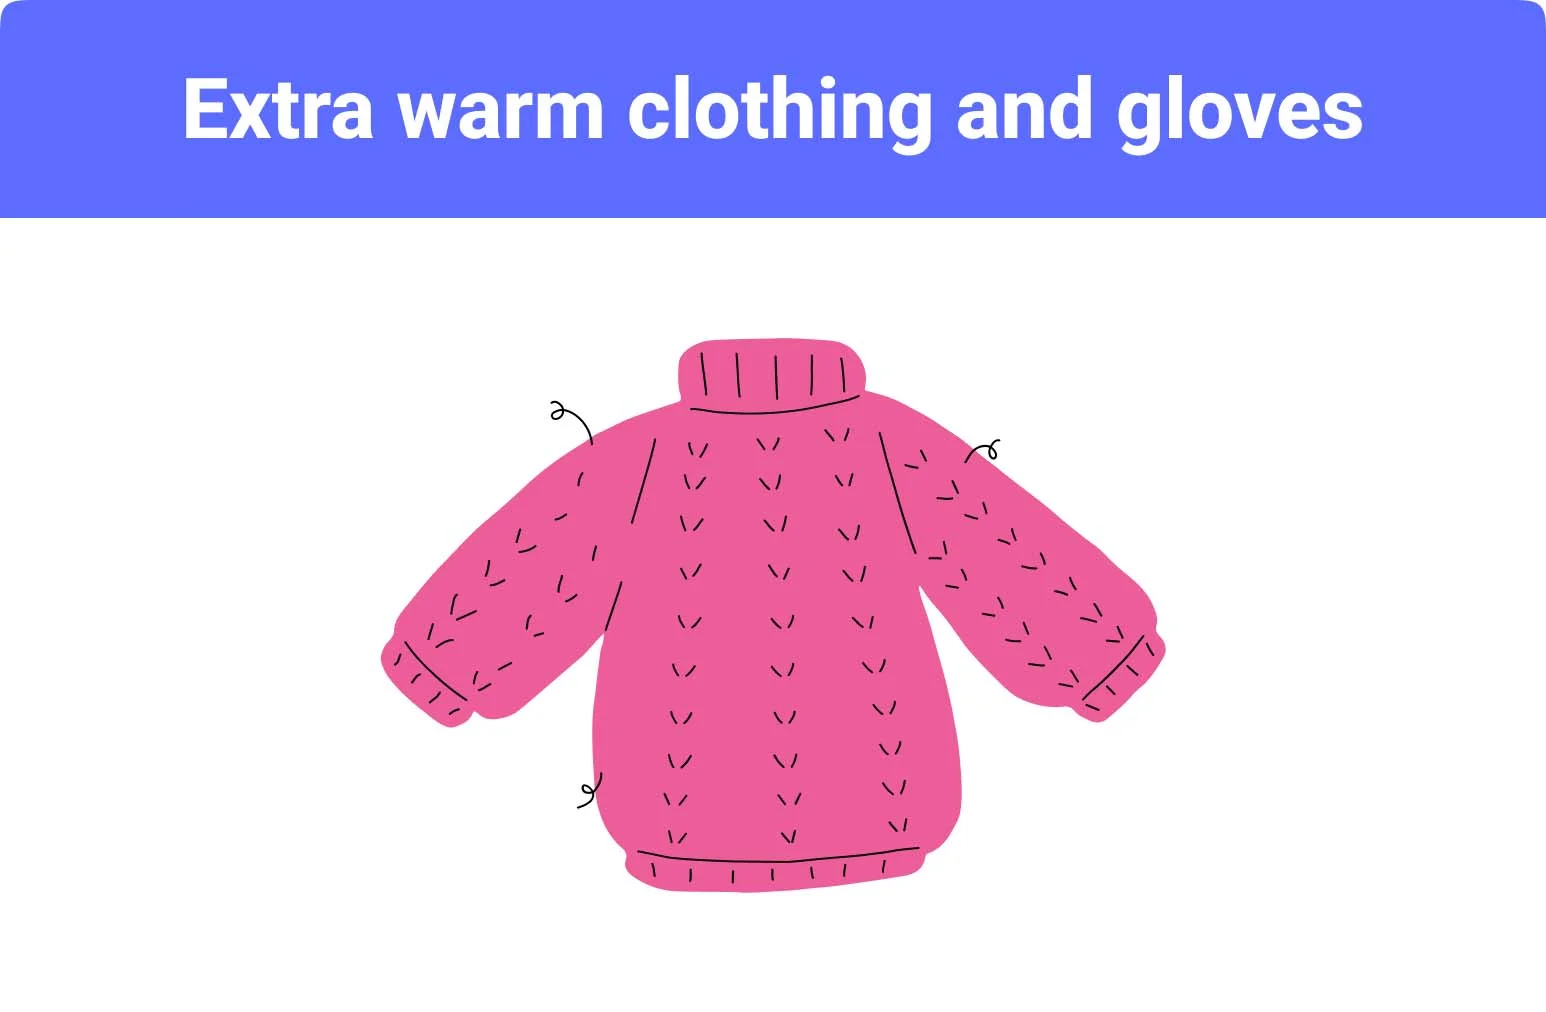 warm clothing and gloves